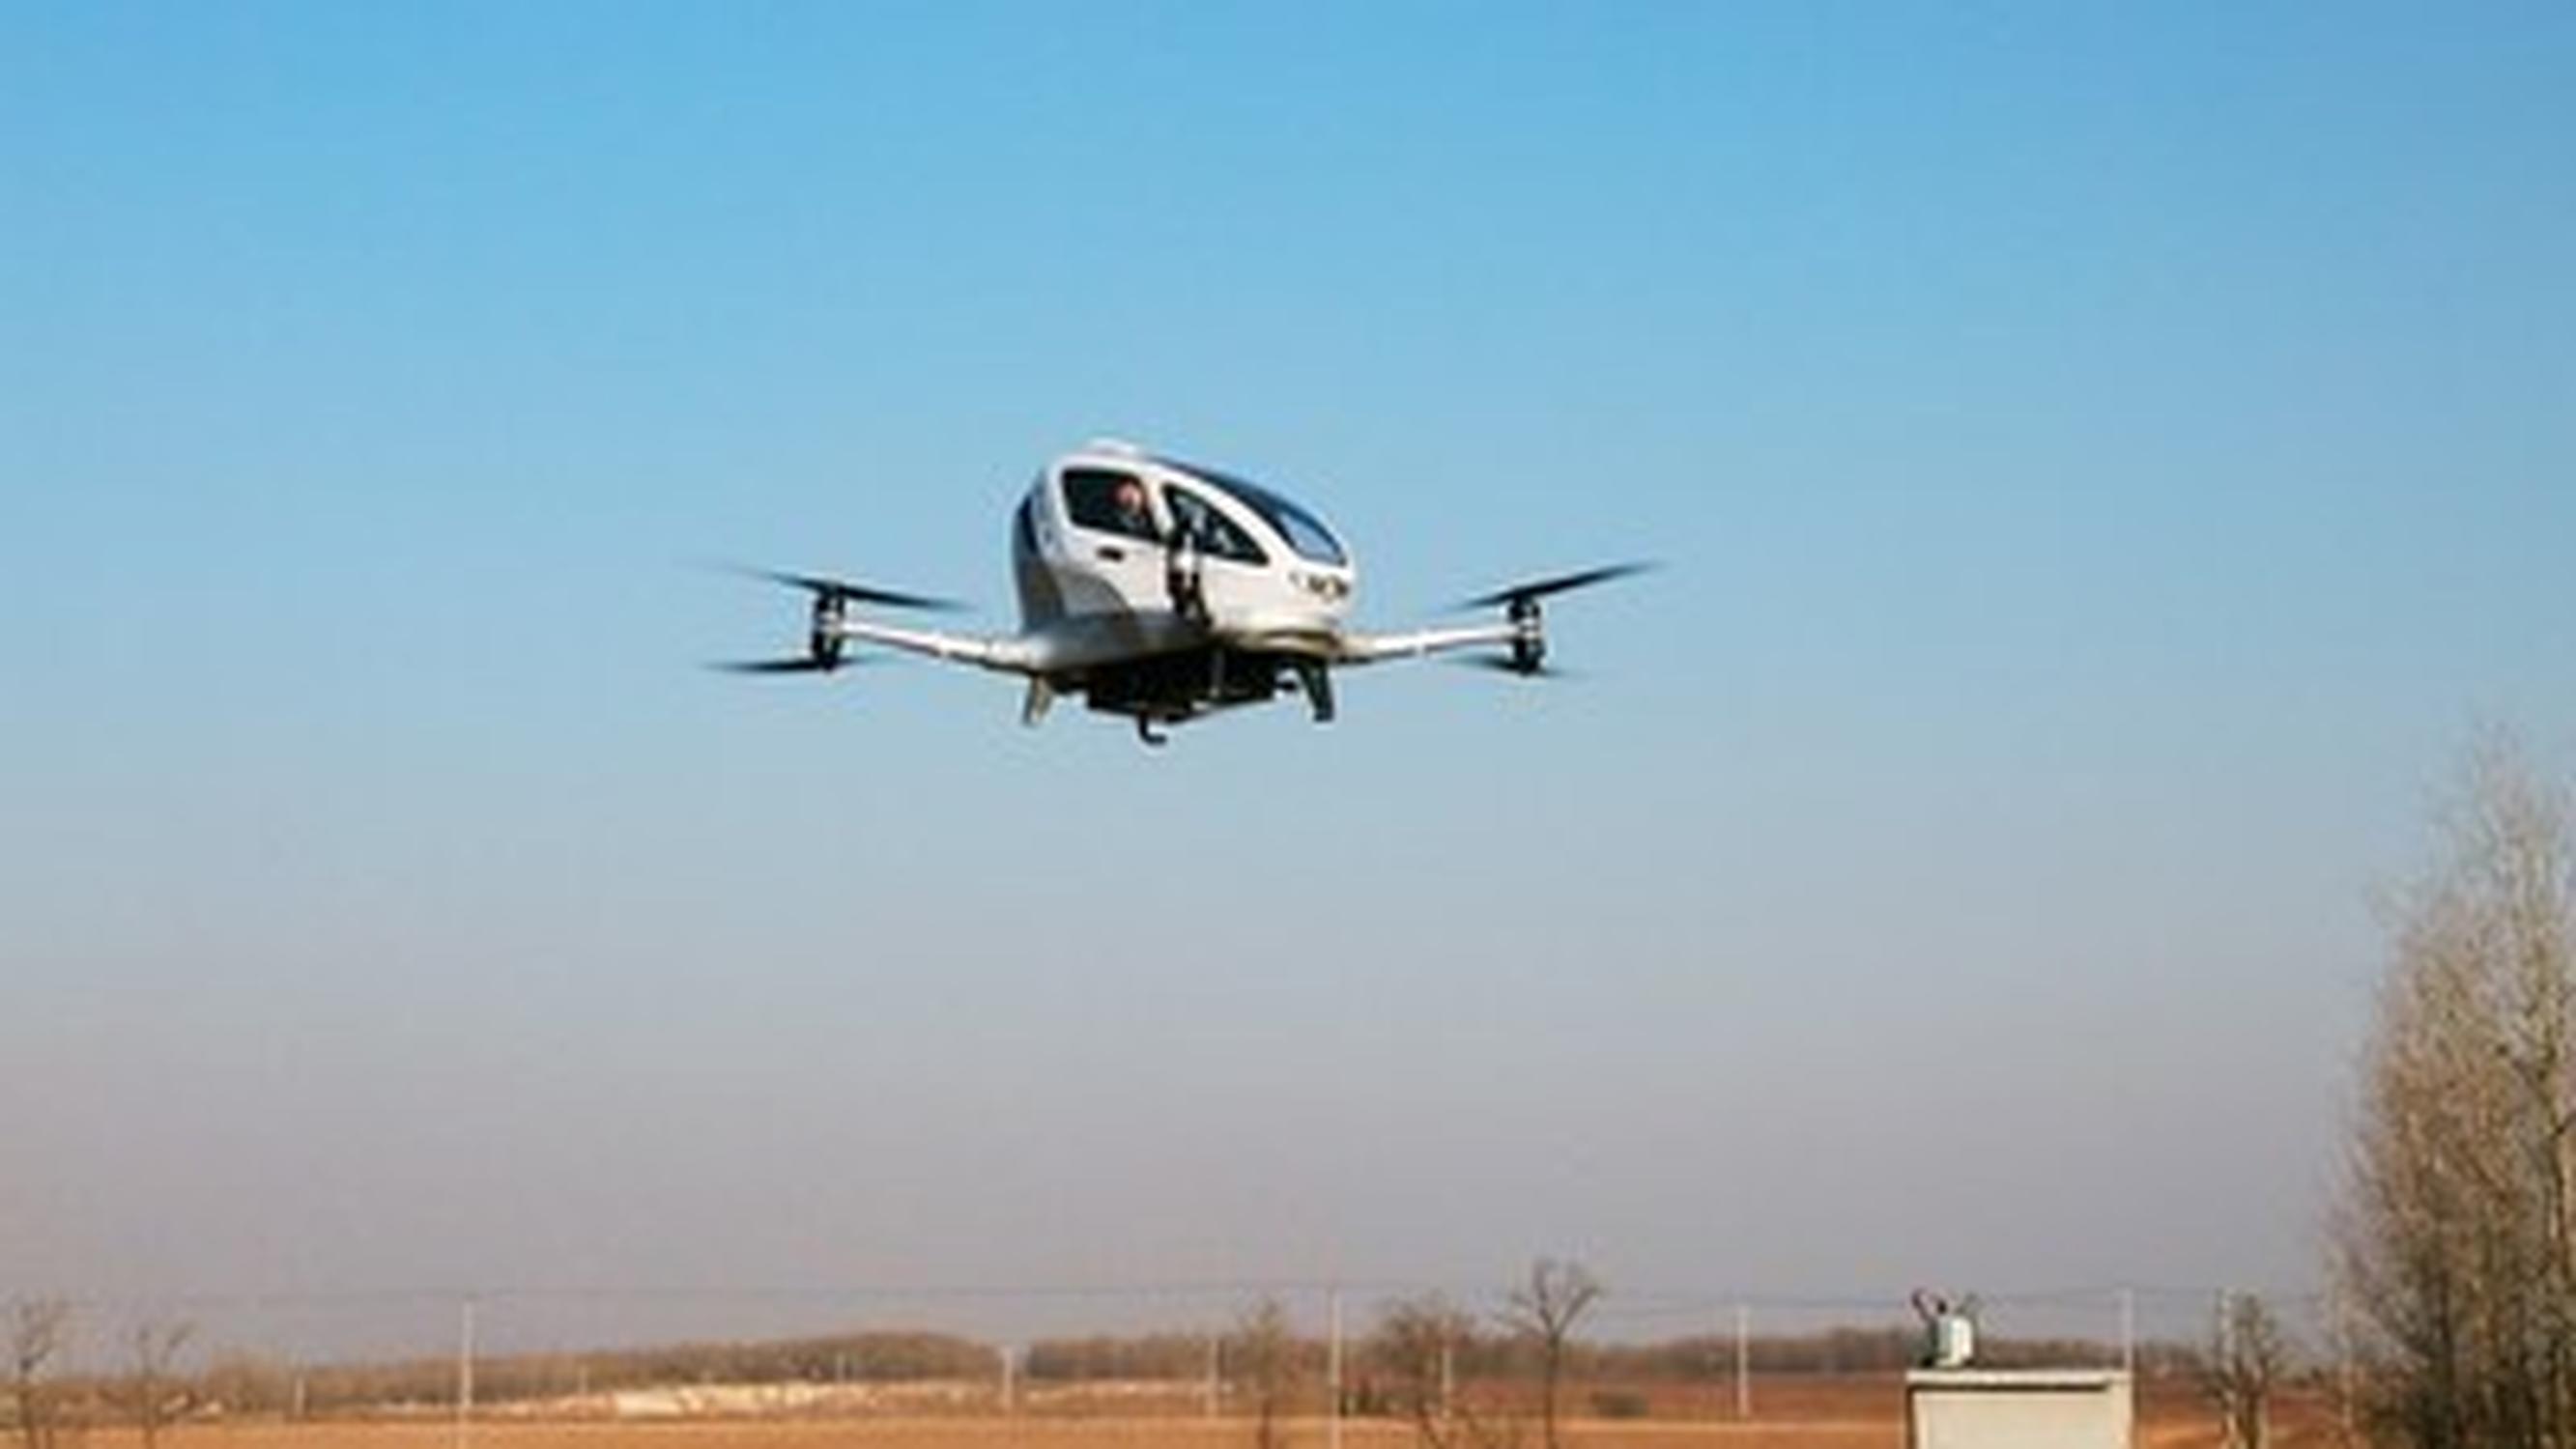 The world`s first passenger drone from Ehang China, flies